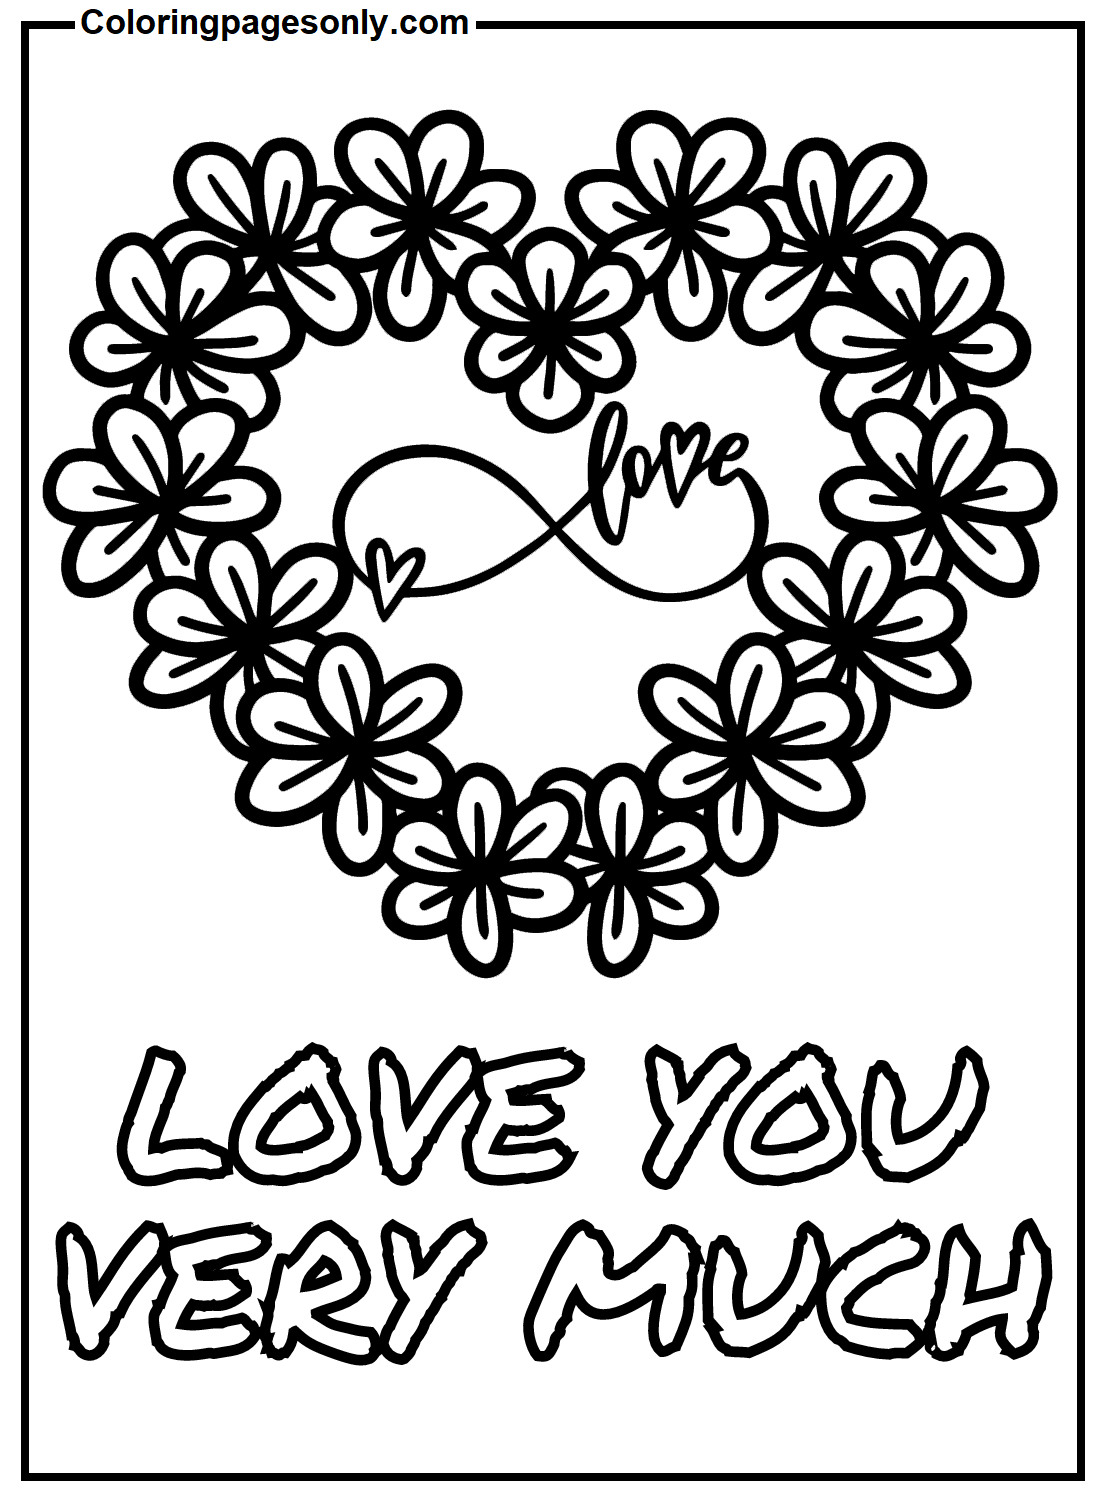 Love You Very Much Coloring Page